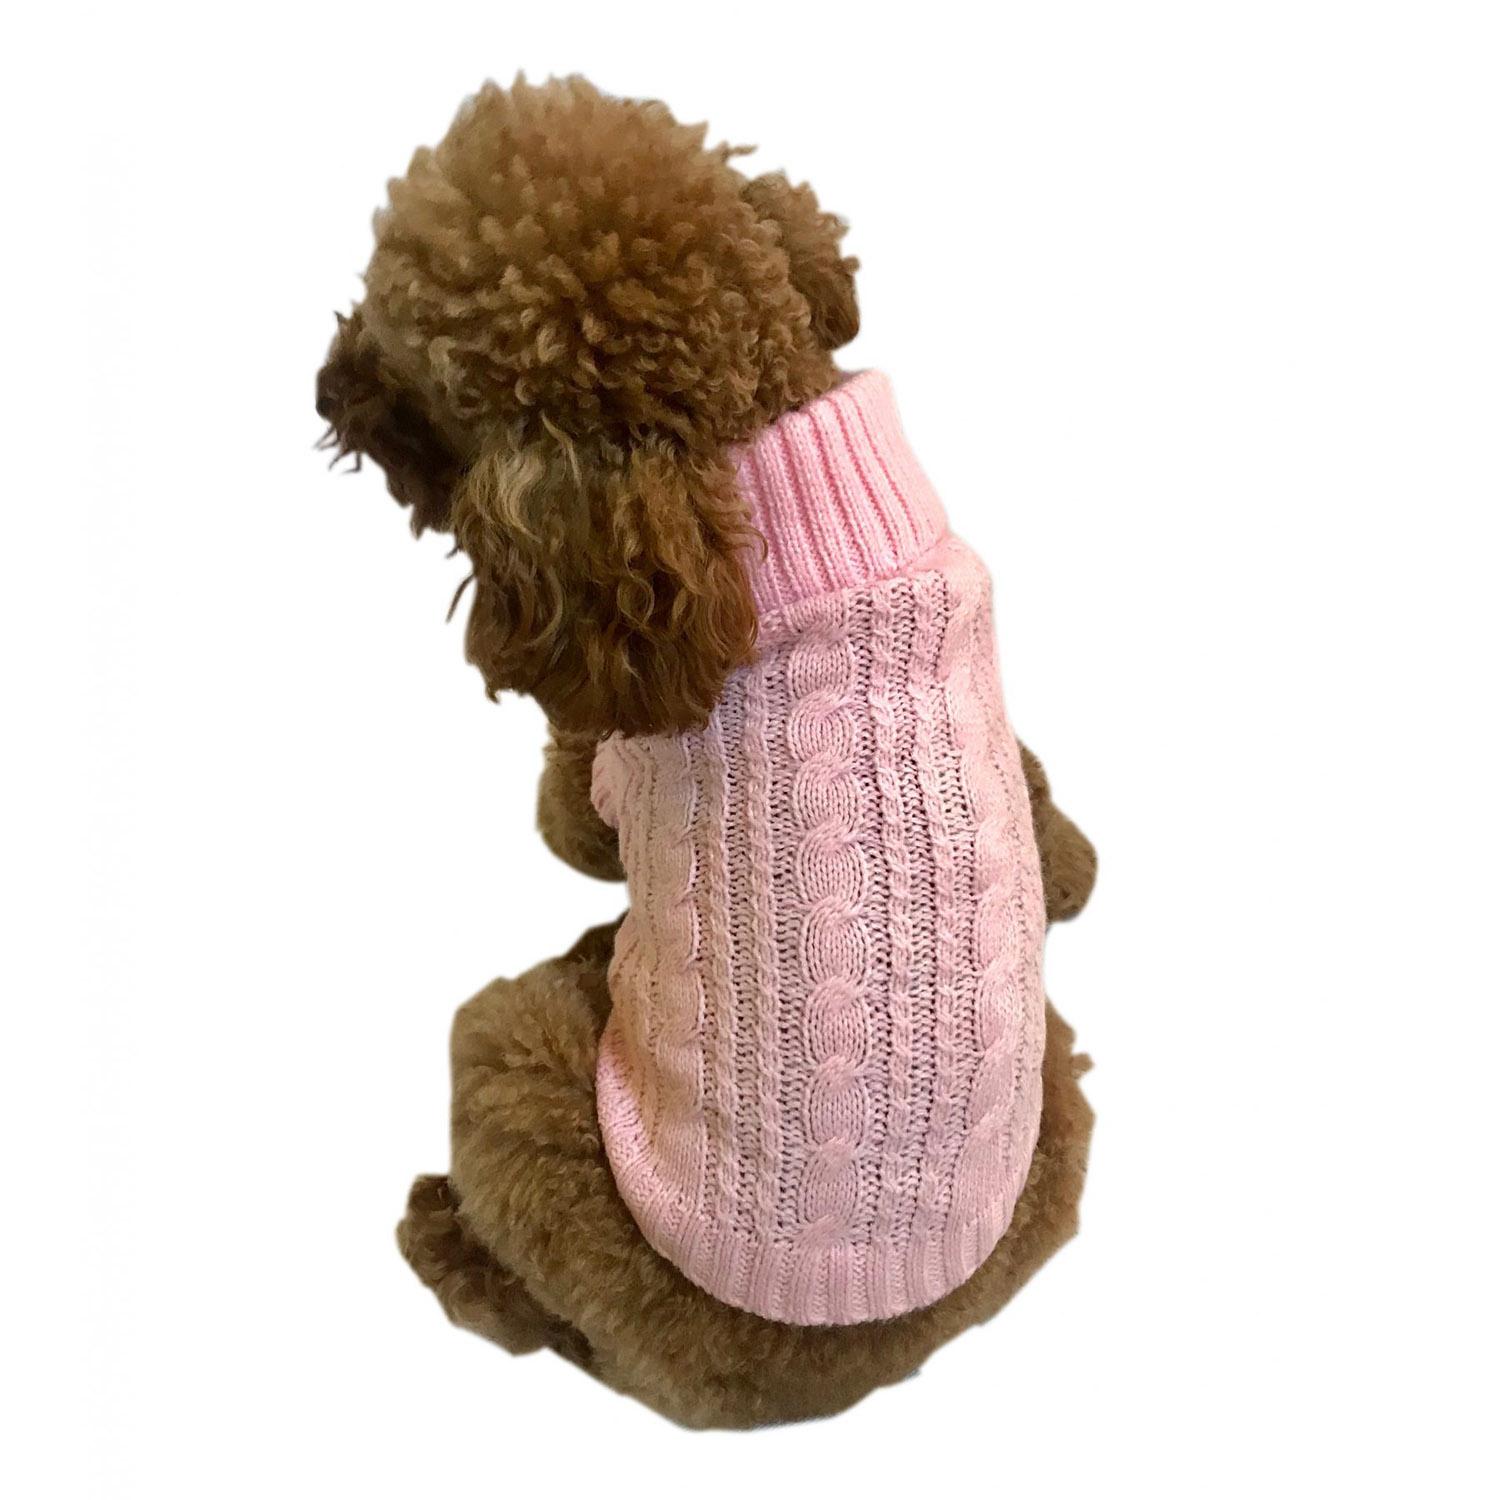 The Dog Squad Scottish Cable Knit Dog Sweater - Pink